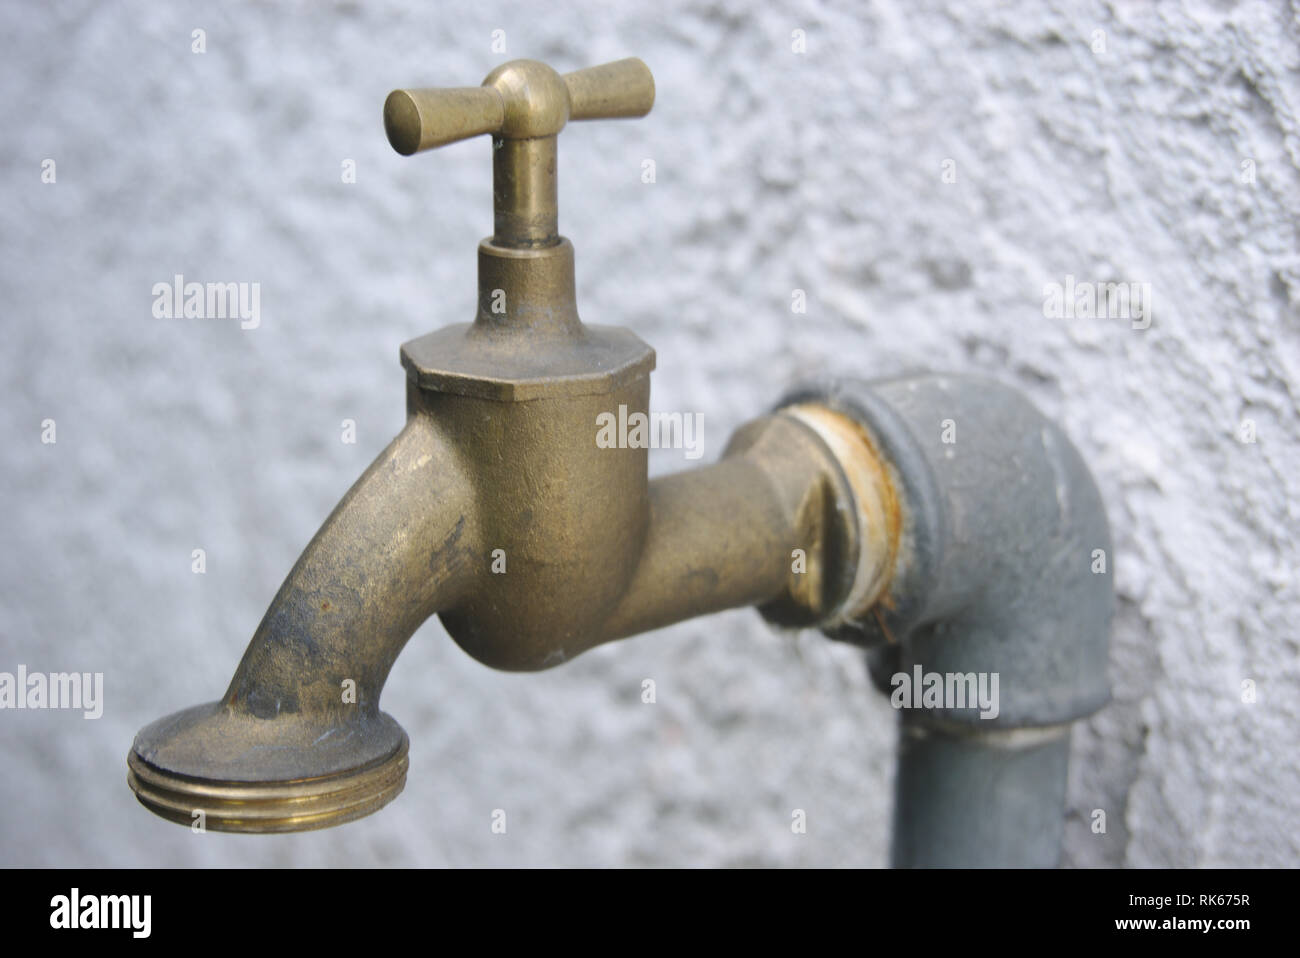 An old tap to pump groundwater Stock Photo